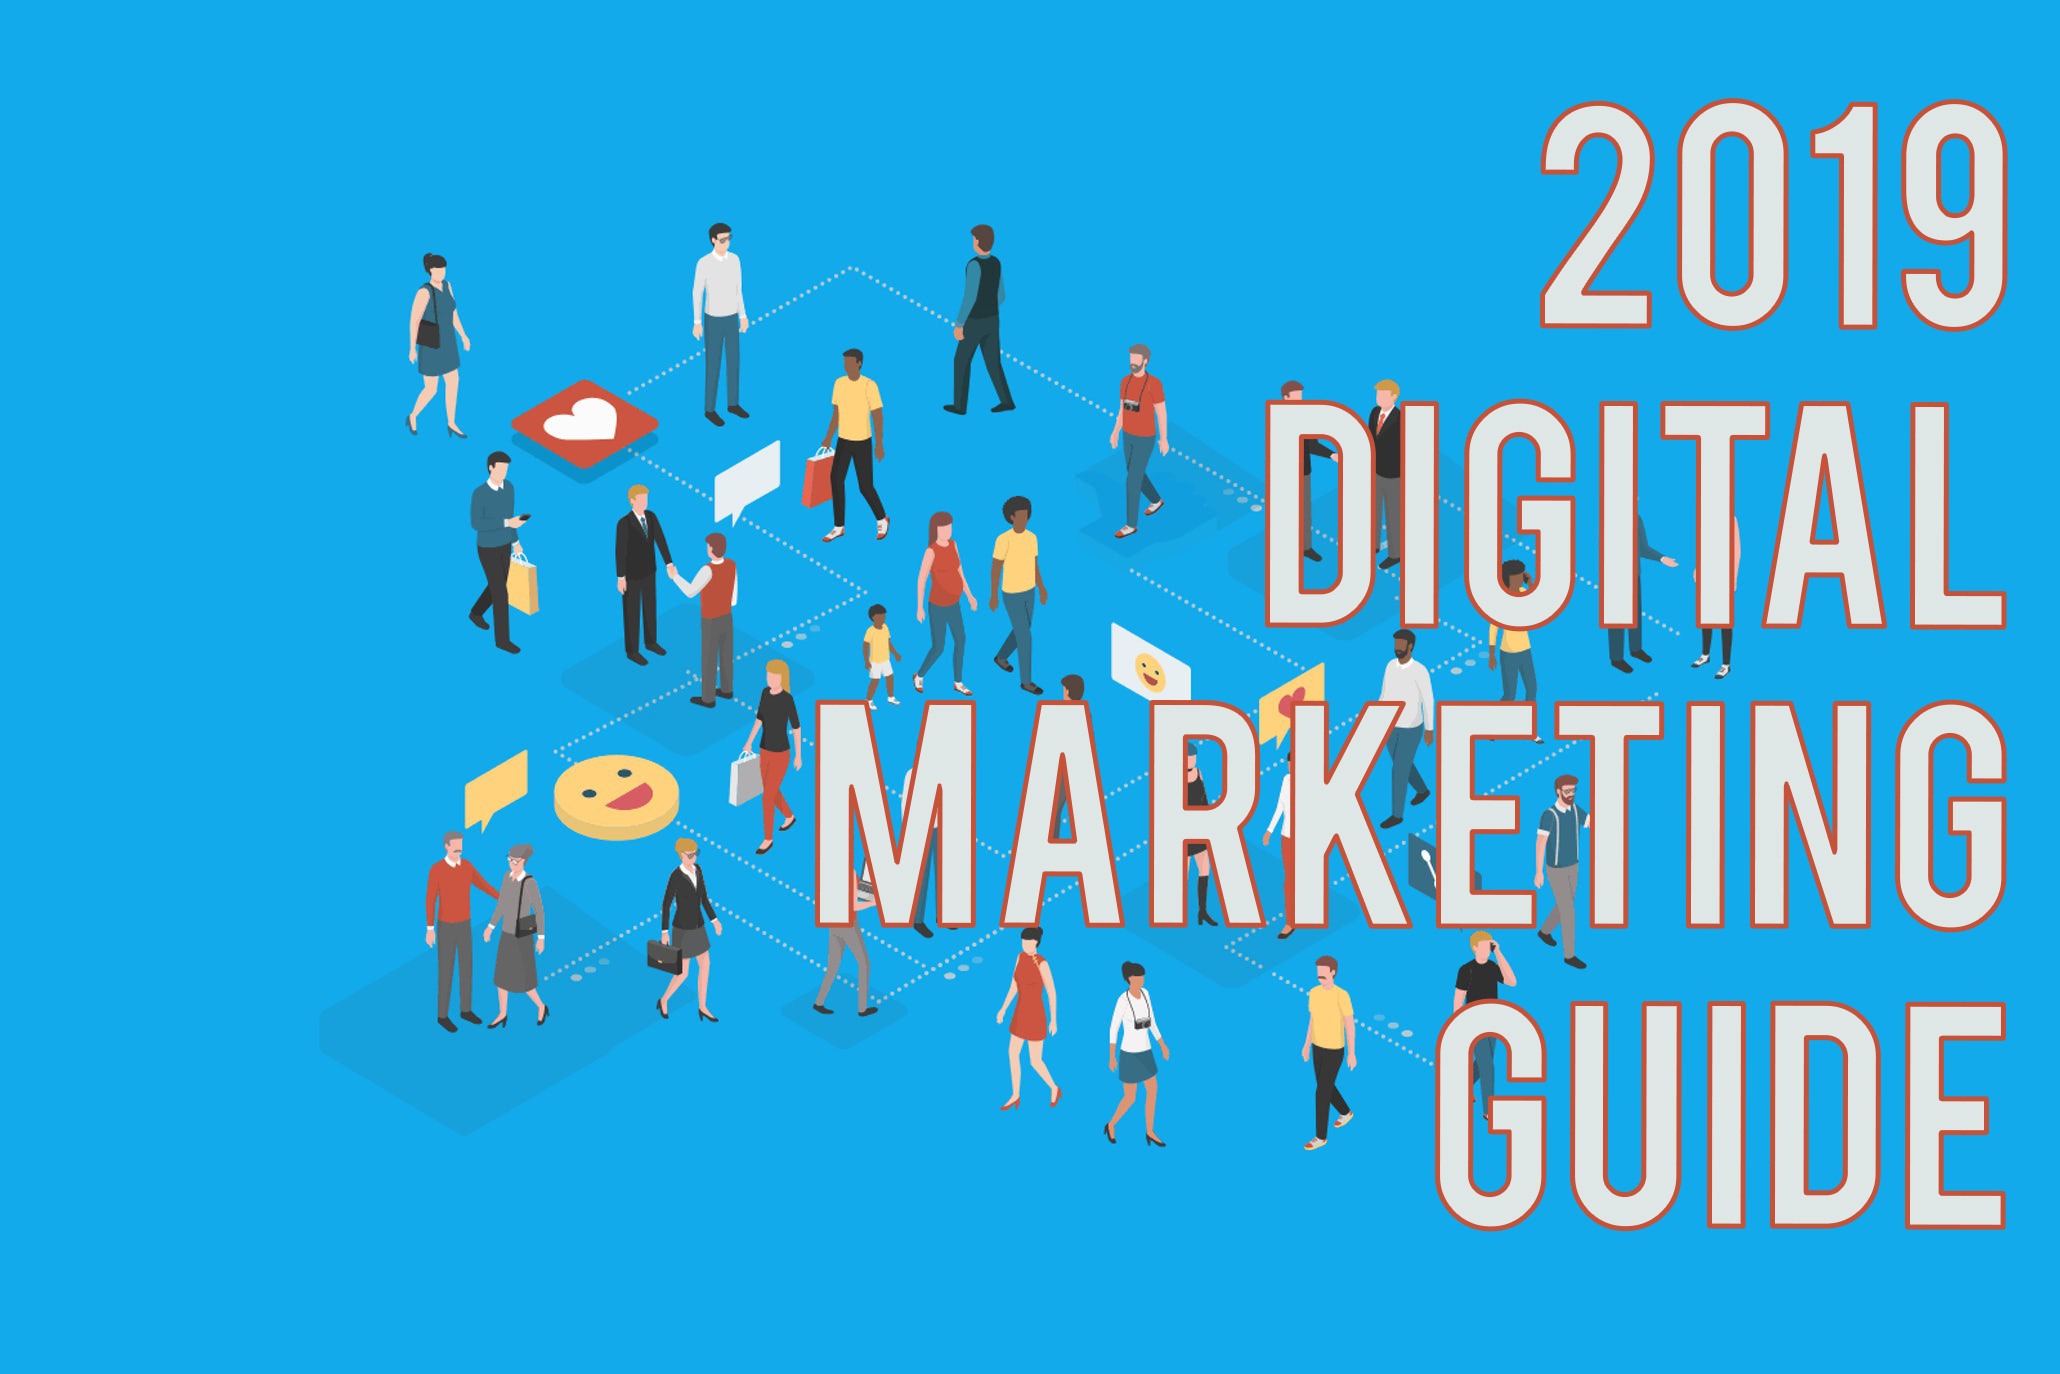 The Complete Digital Marketing 2019 Guide - Business 2 Community